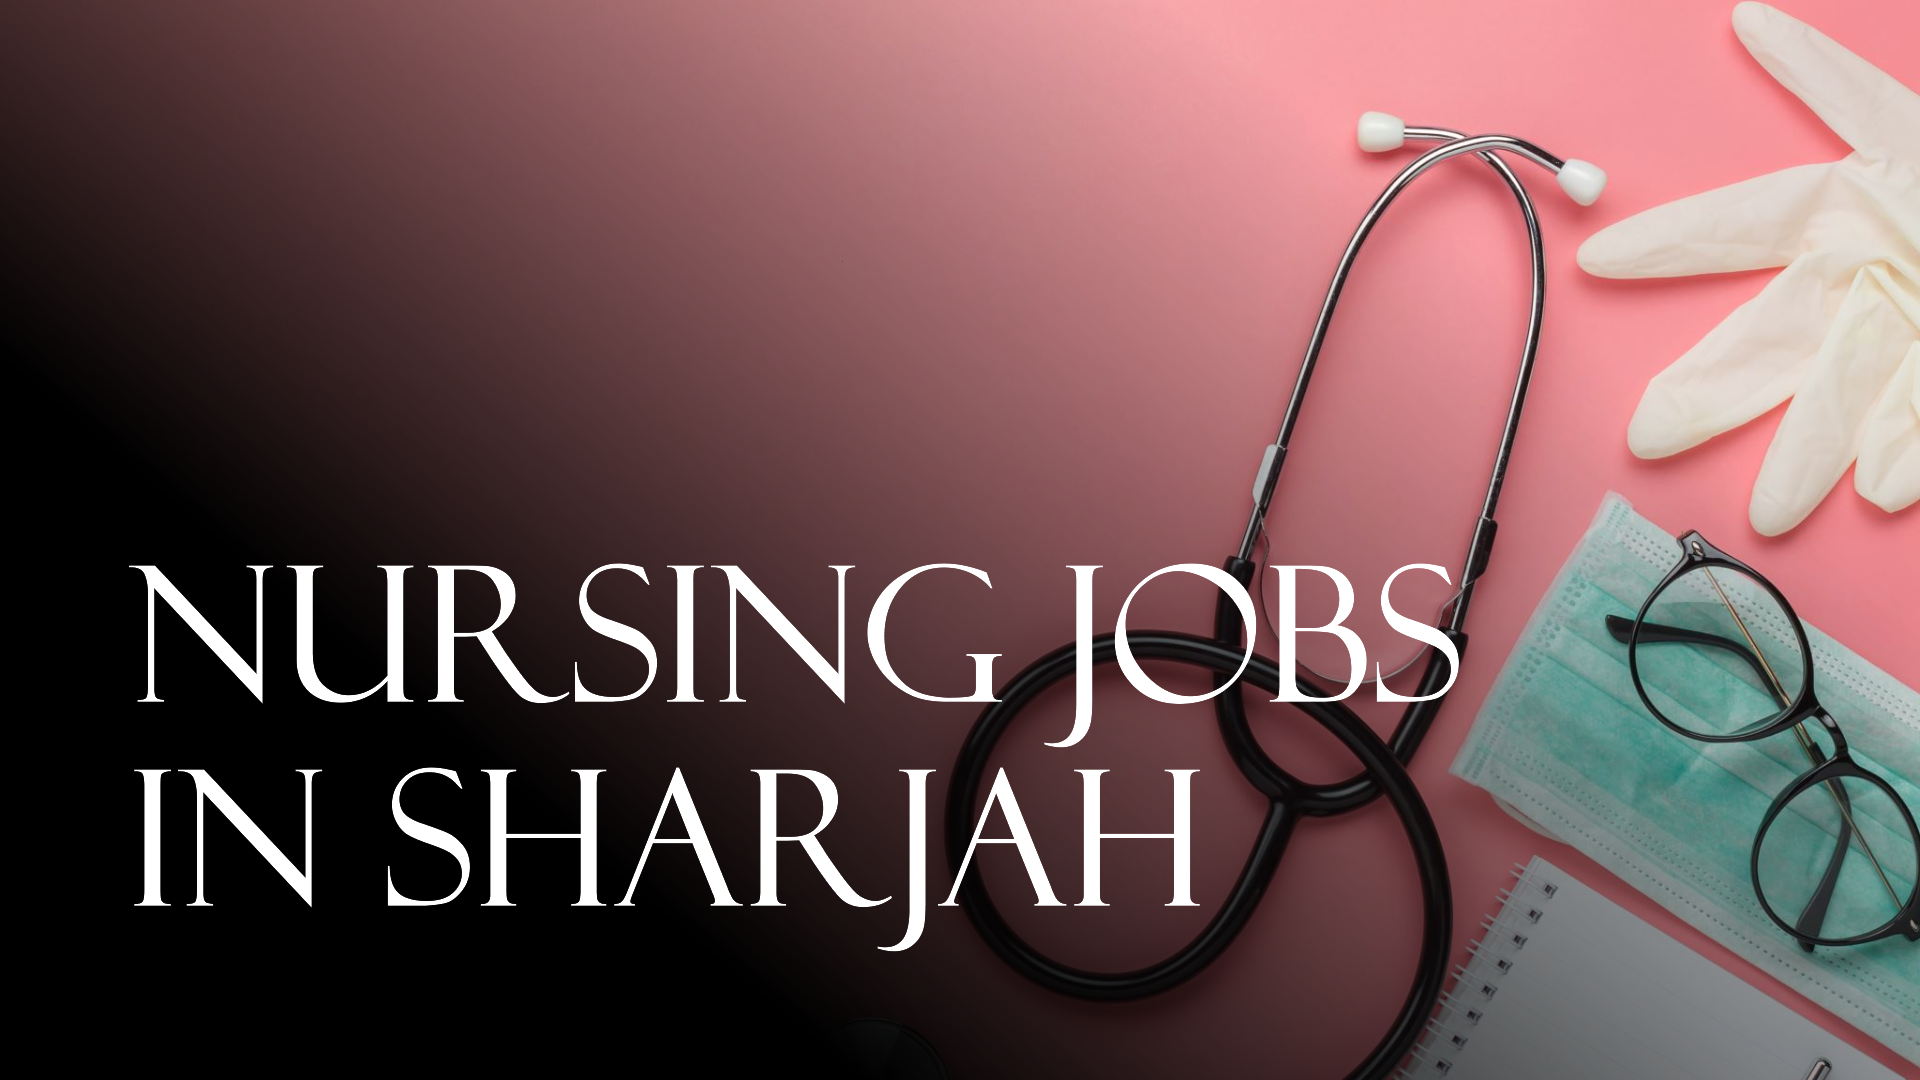 nursing jobs in sharjah for all nationalities with salary 4000 AED